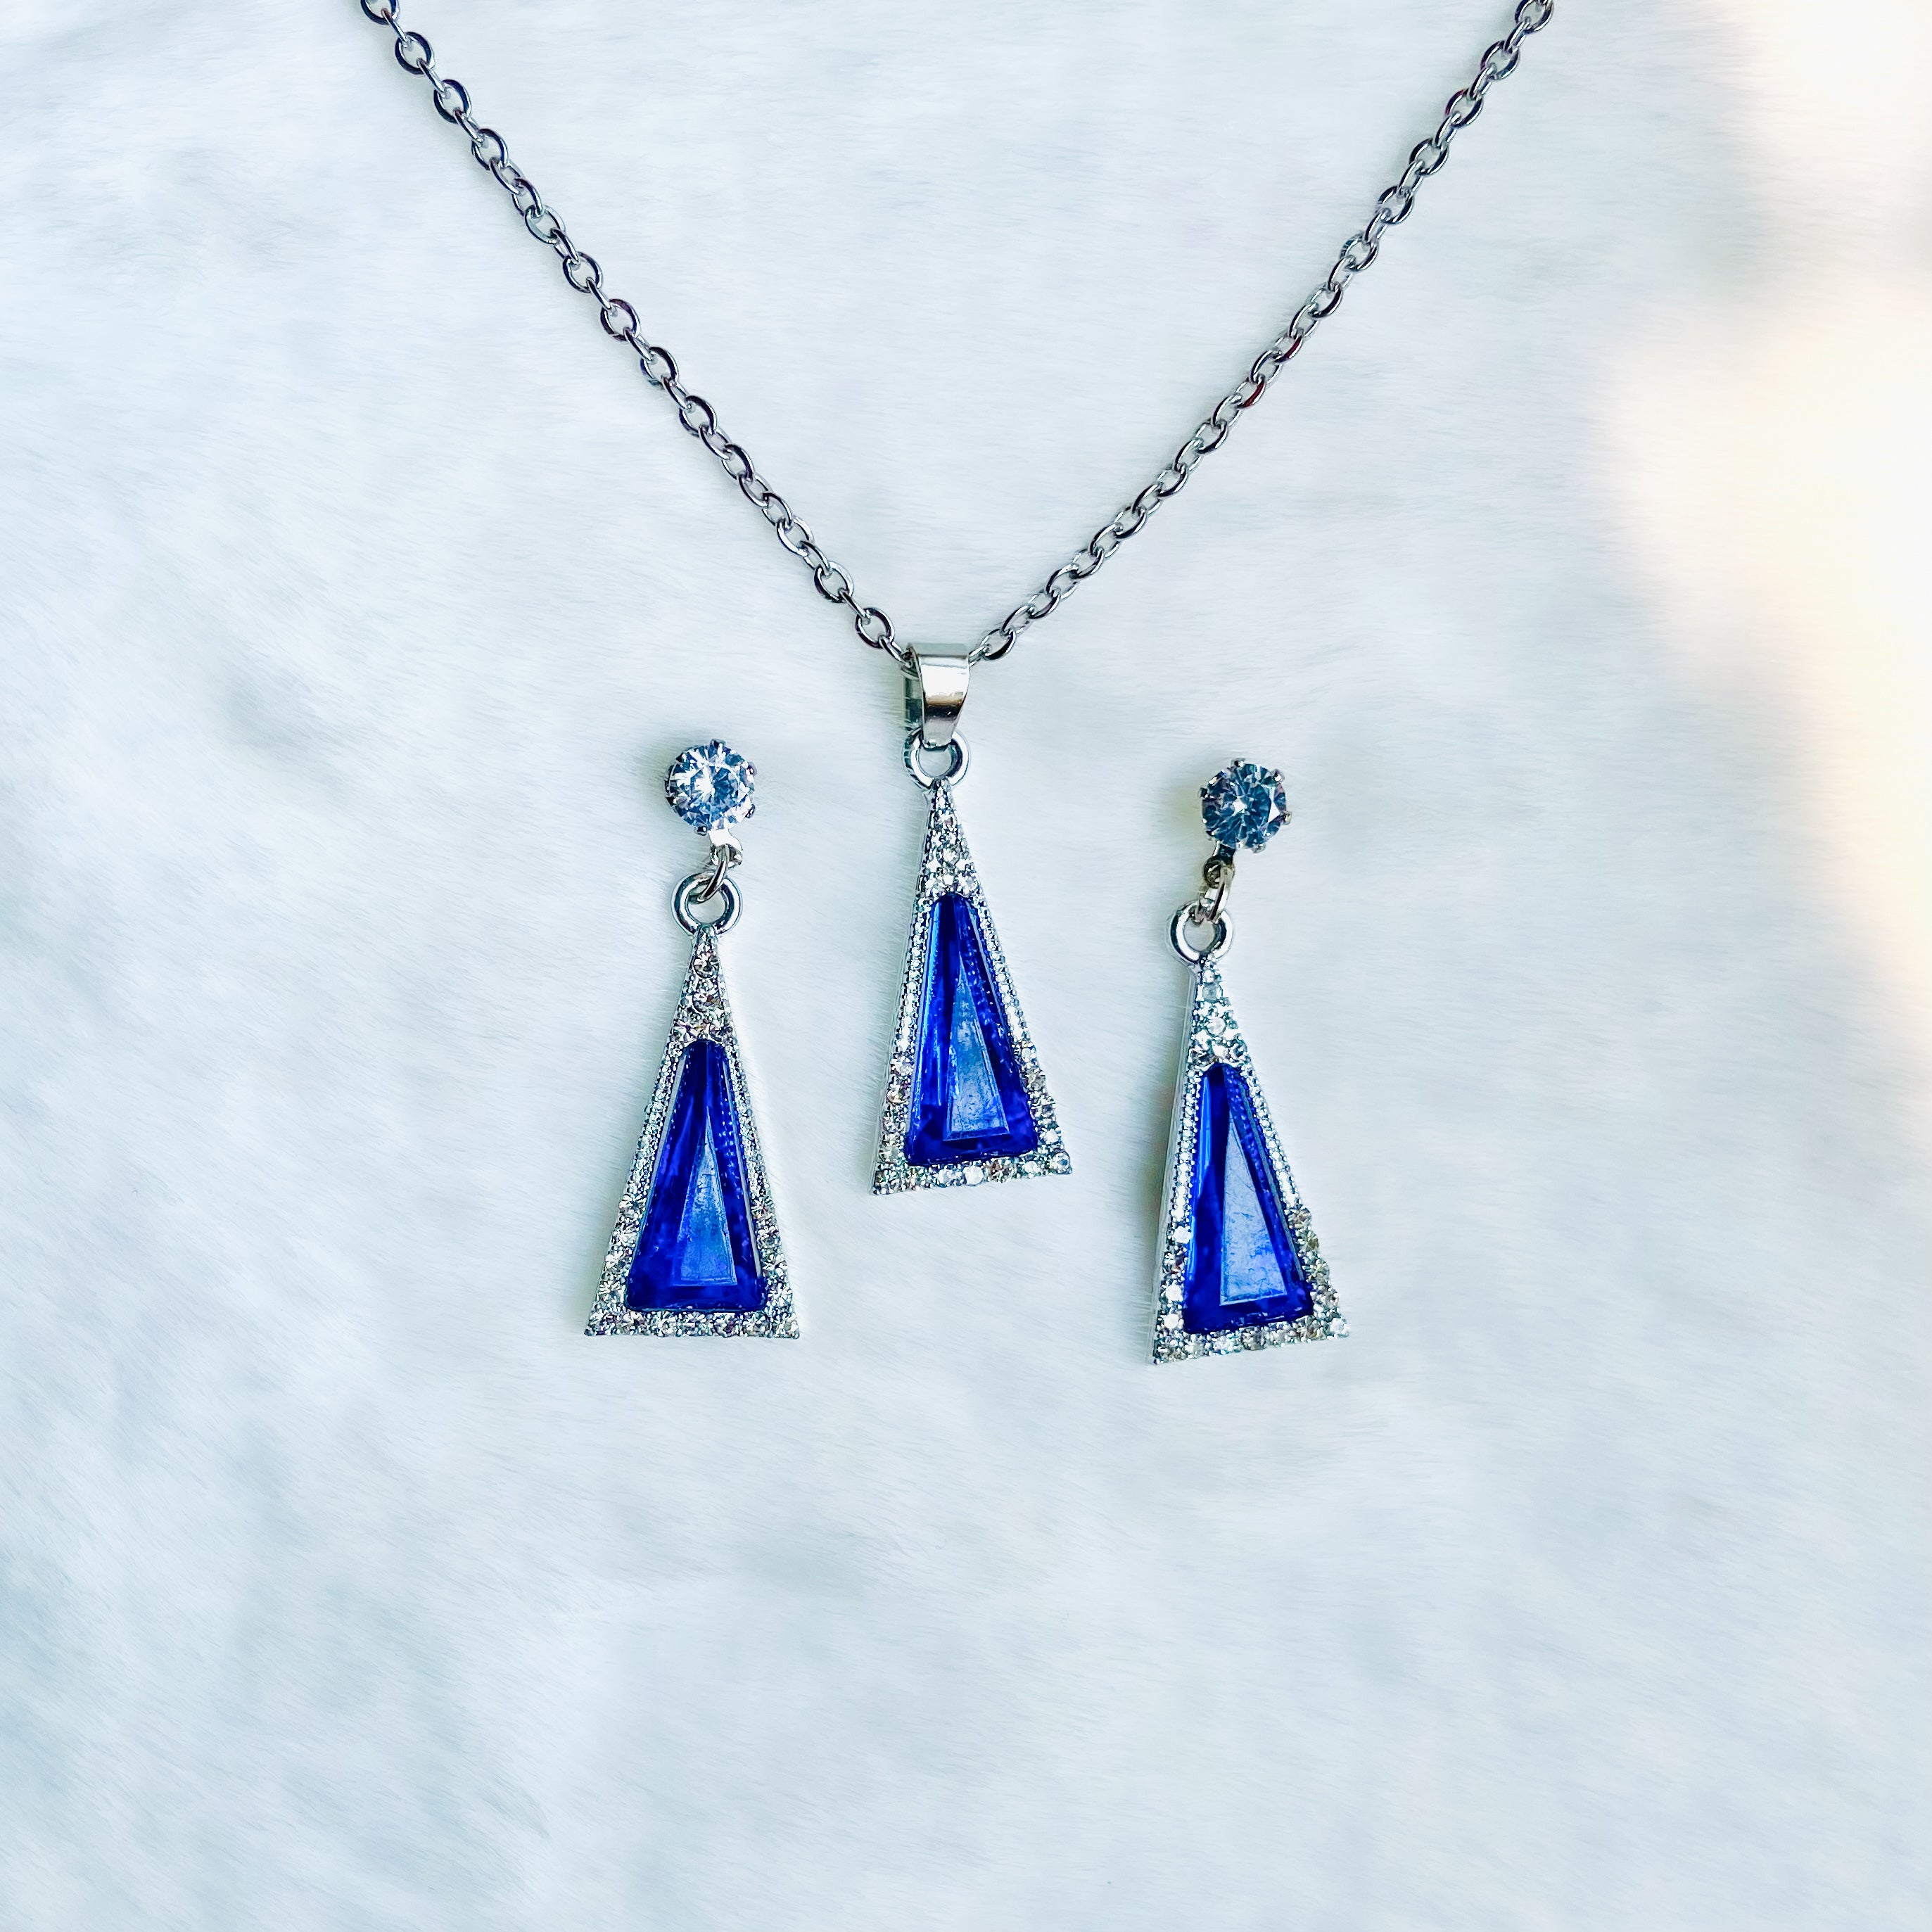 Blue Crystal Necklace Set for Women Fashion